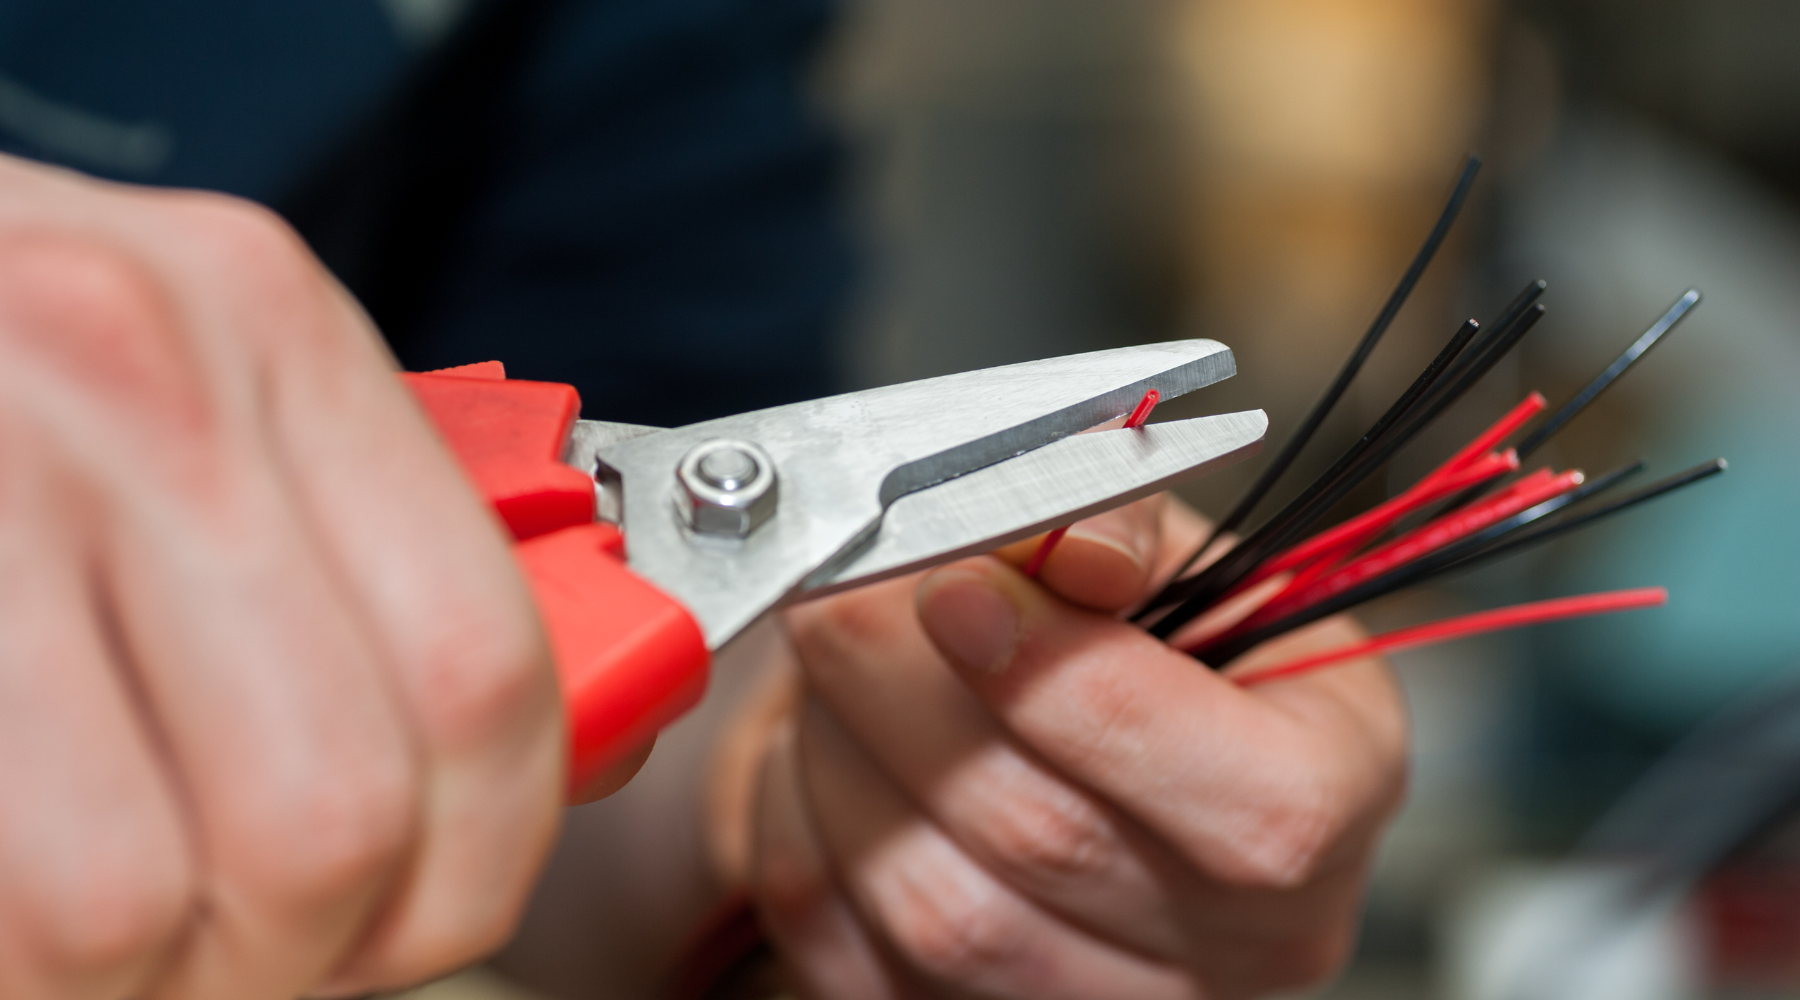 Hand Tool & Electrical Cord Best Practices